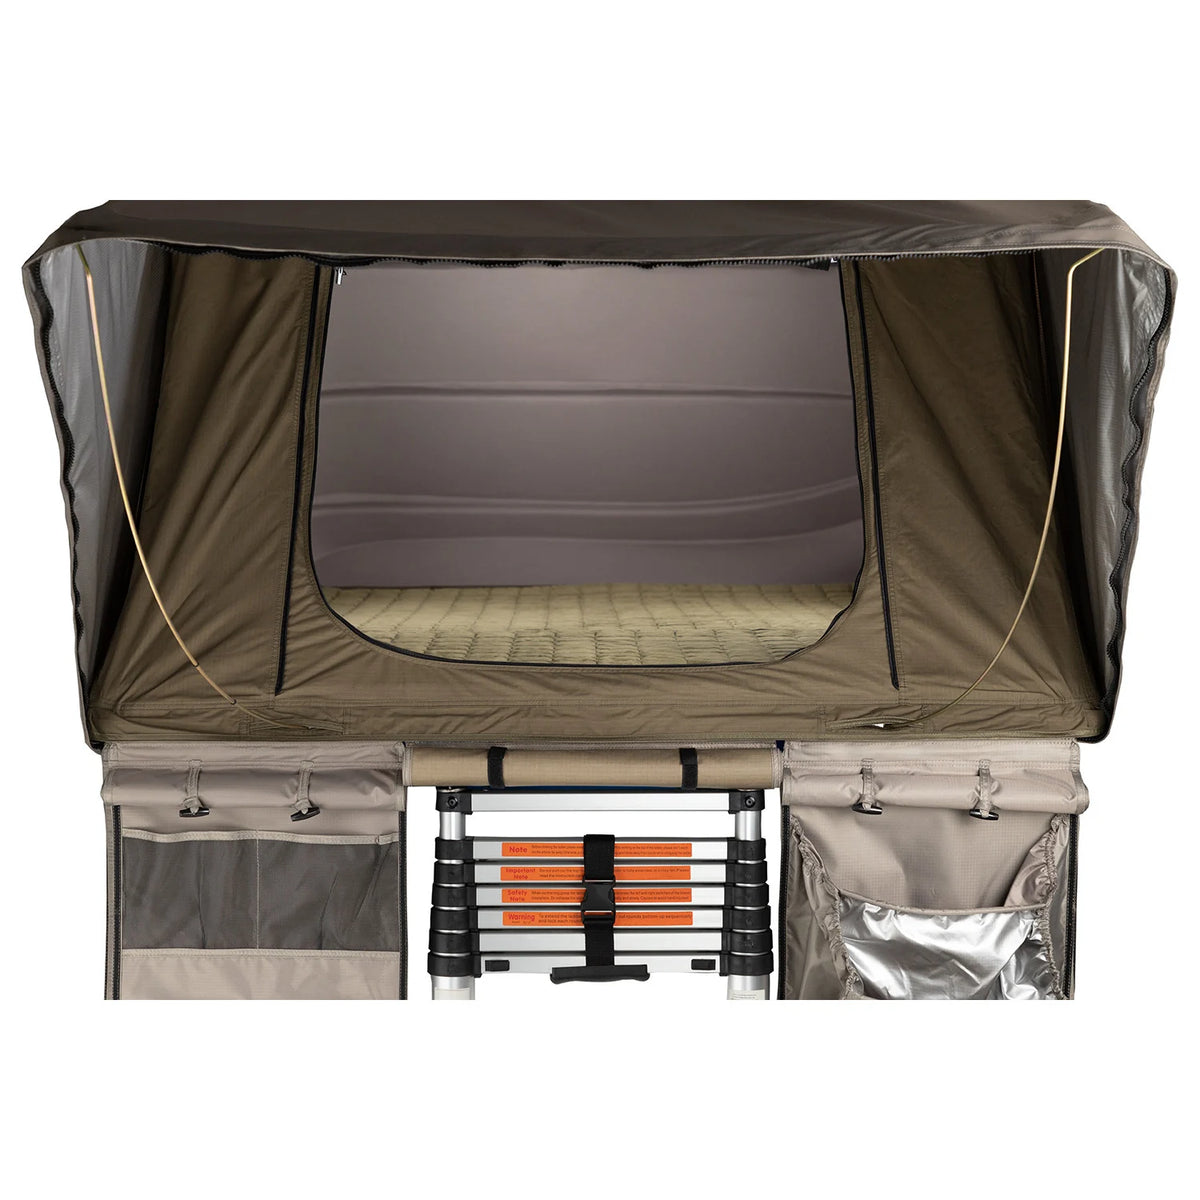 ARB Esperance Compact Hard Shell Rooftop Tent - 3 Person